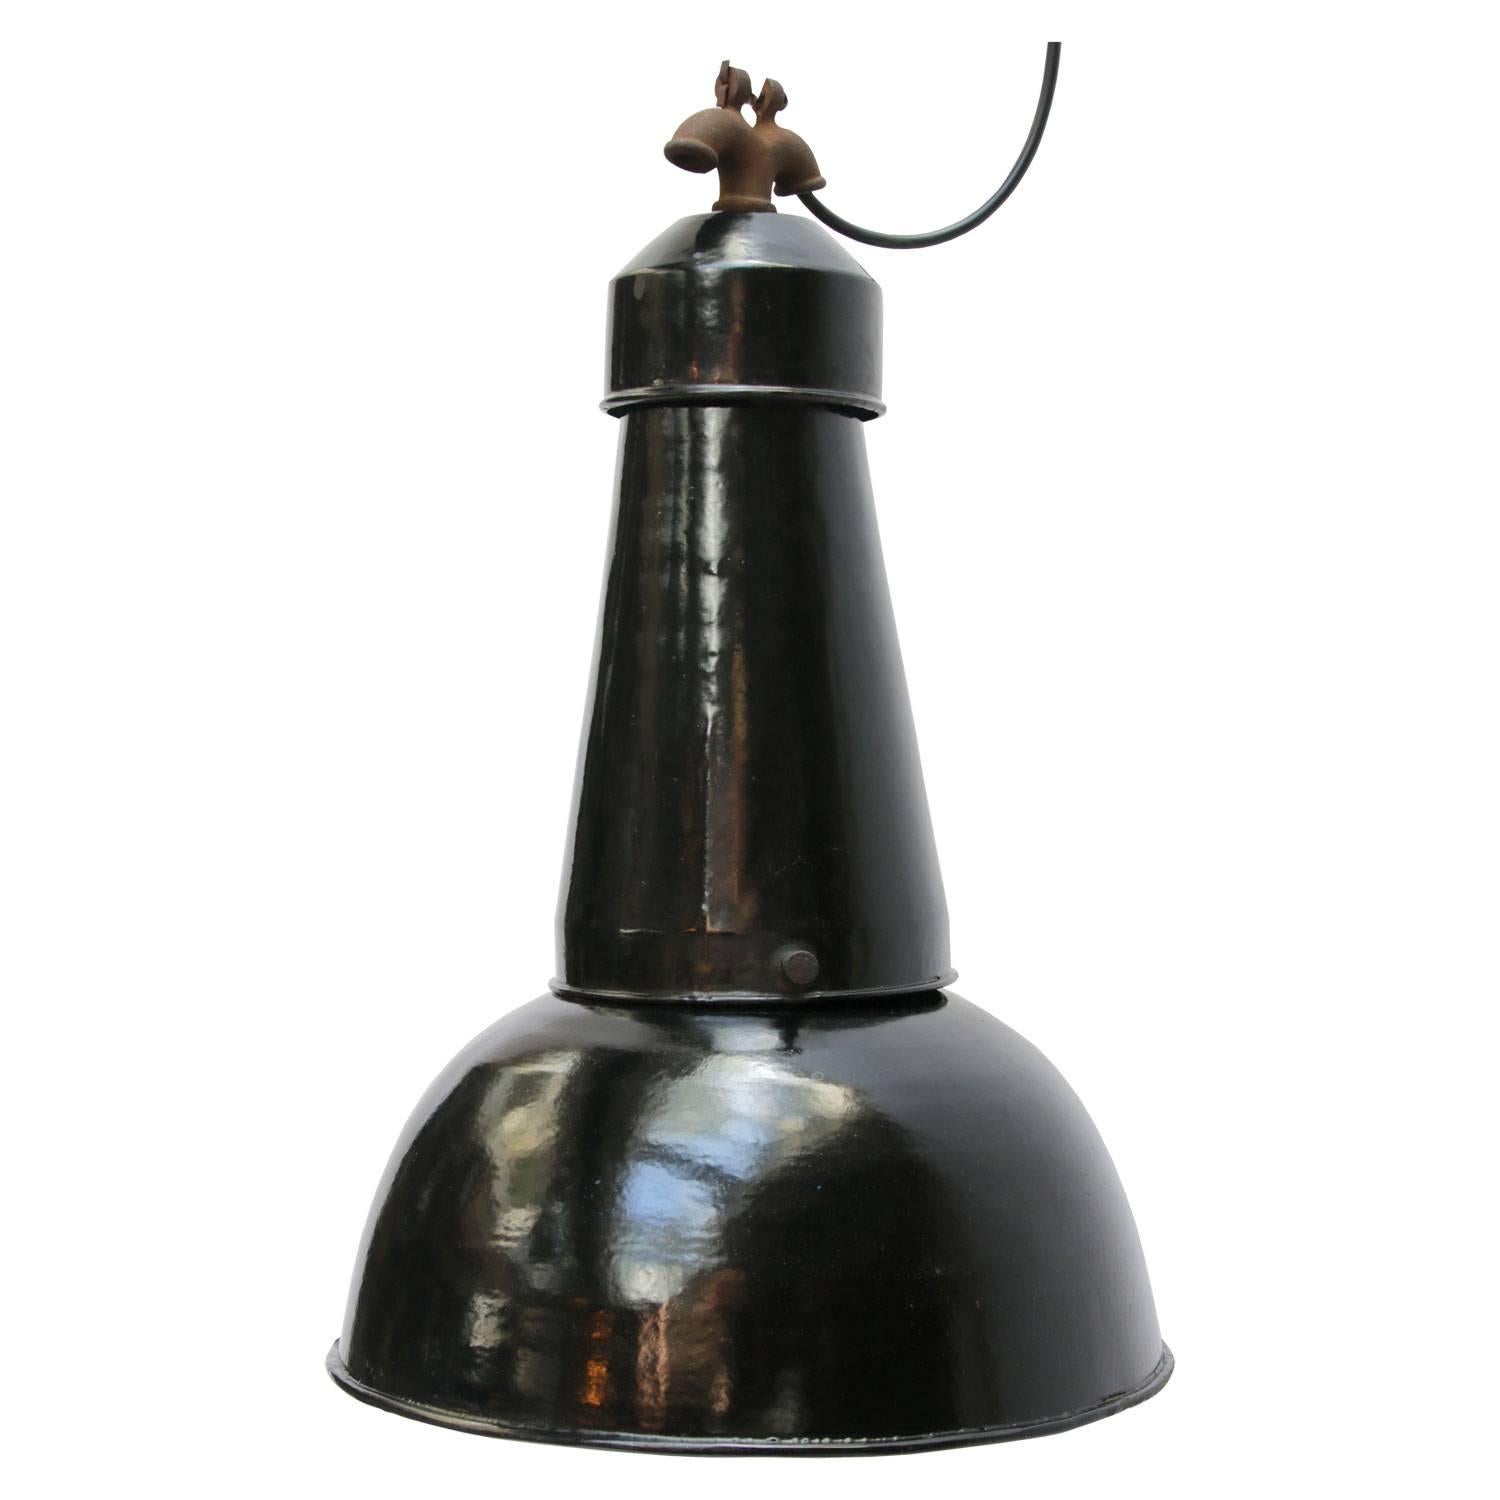 Factory lamp black enamel. White interior cast iron top.

Measure: Weight 2.5 kg / 5.5 lb

All lamps have been made suitable by international standards for incandescent light bulbs, energy-efficient and LED bulbs. E26/E27 bulb holders and new wiring